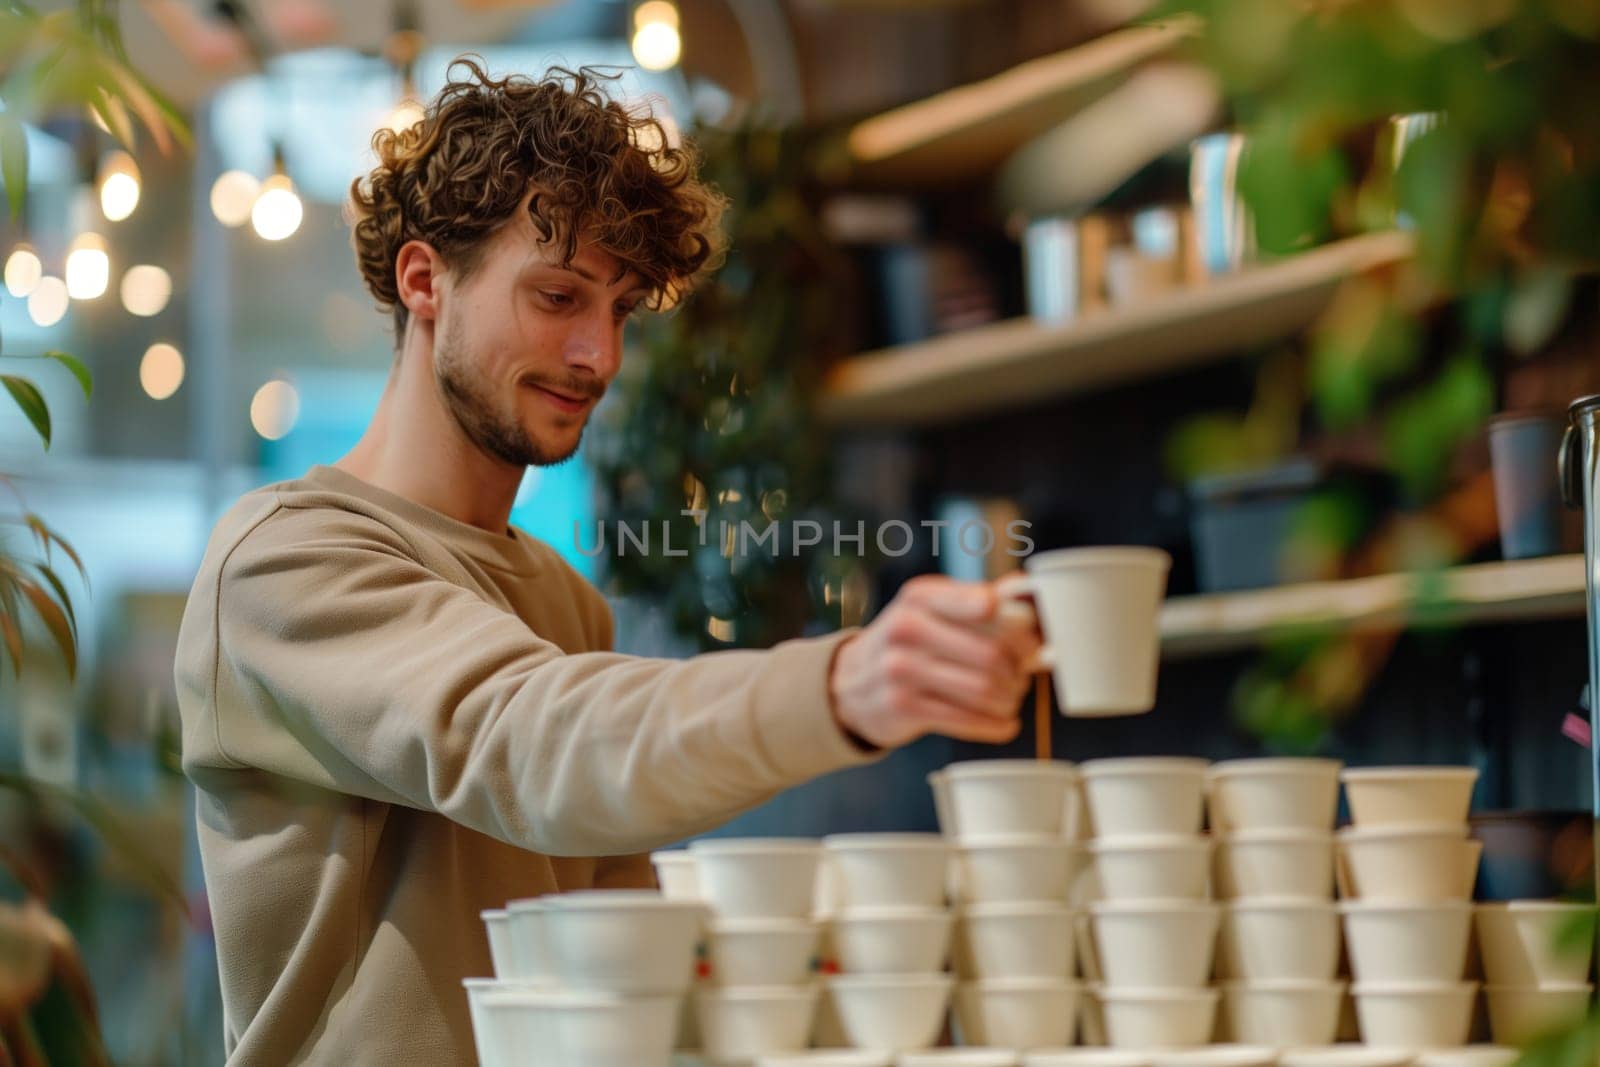 A man in a cafe is pouring coffee from a pottery cup with a wooden sleeve onto a tableware. There is an automotive wheel system machine in the background, adding to the recreation event